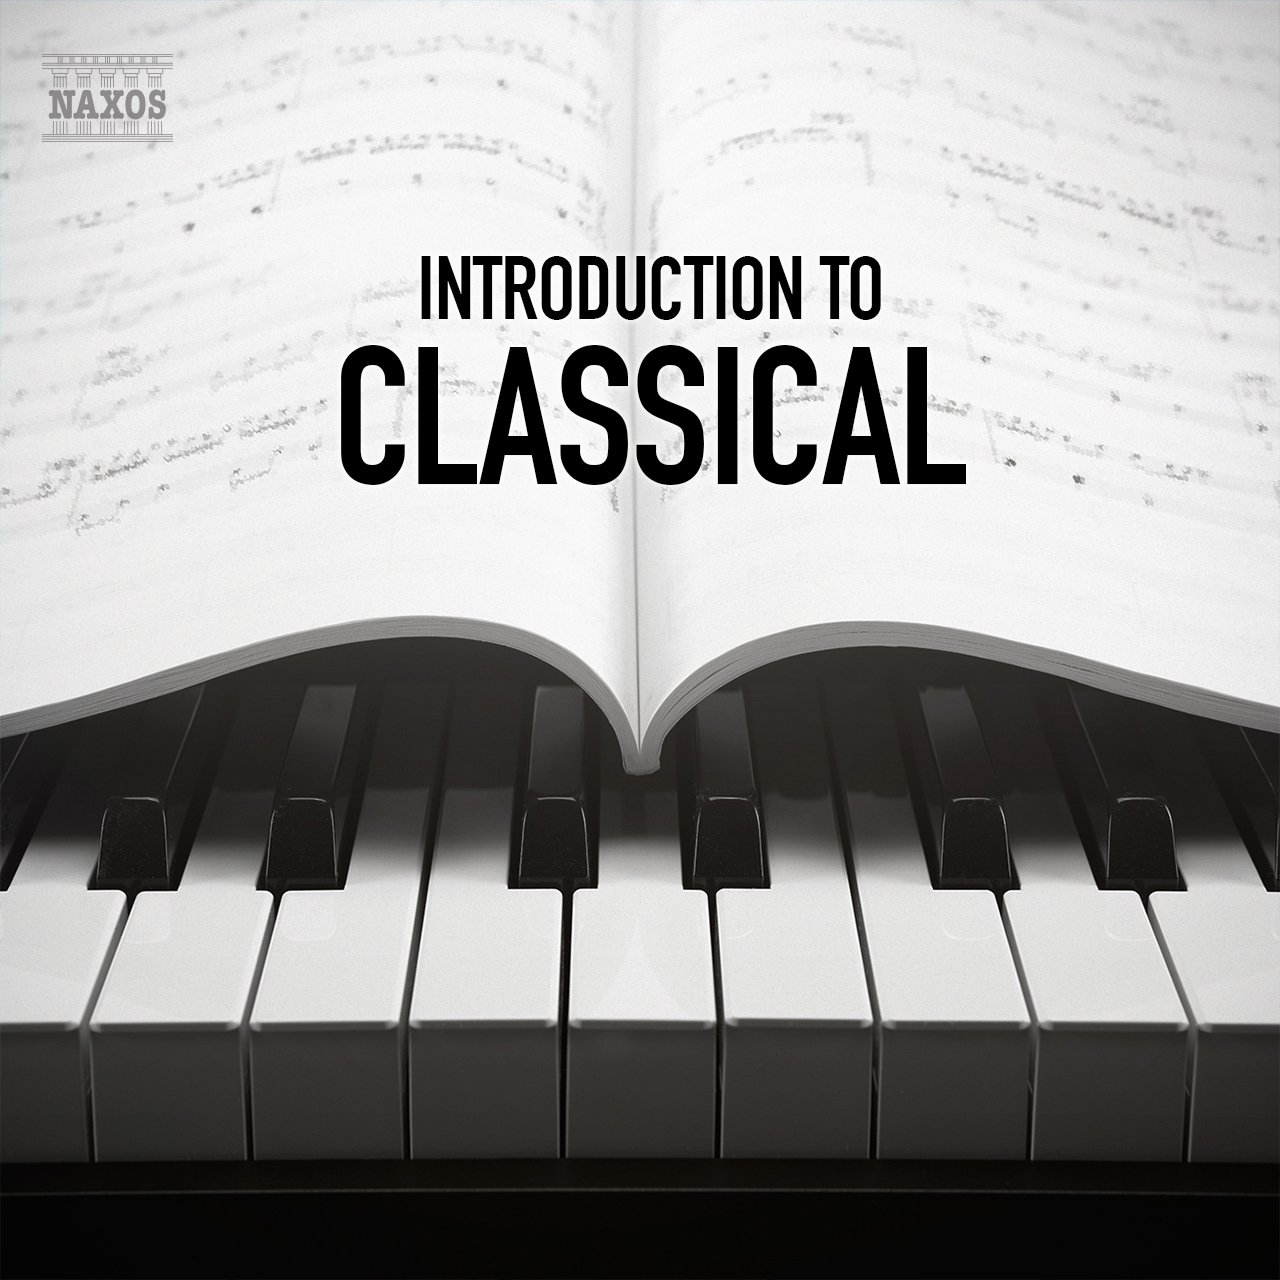 Introduction to Classical